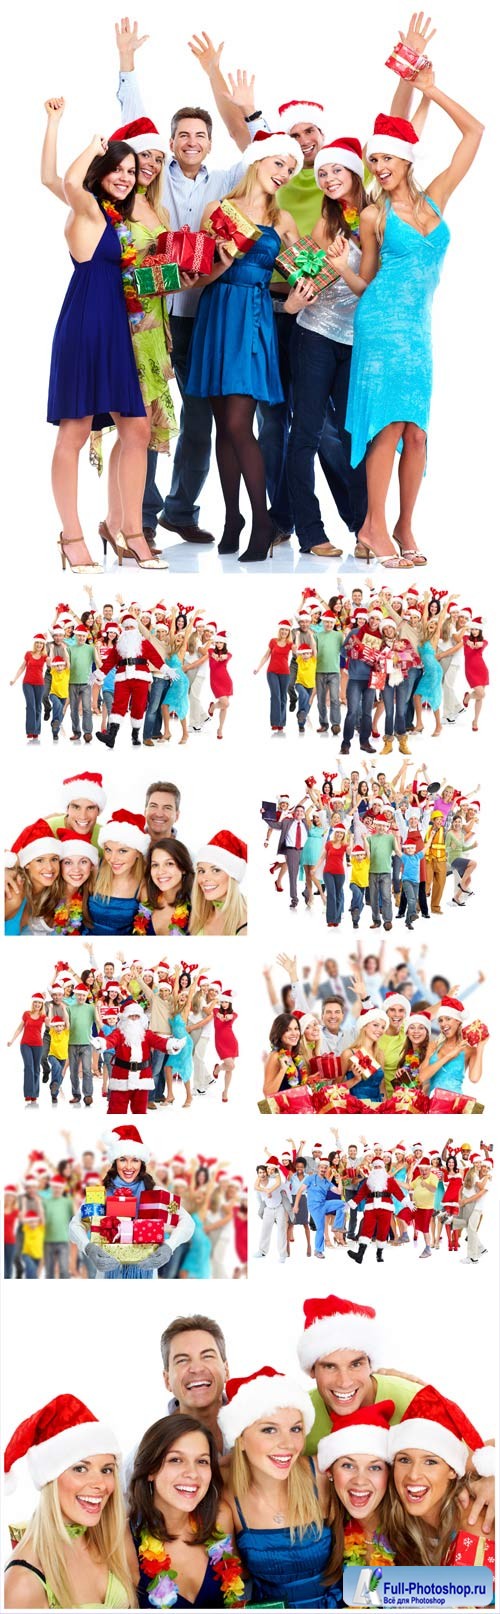 New Year and Christmas stock photos 8